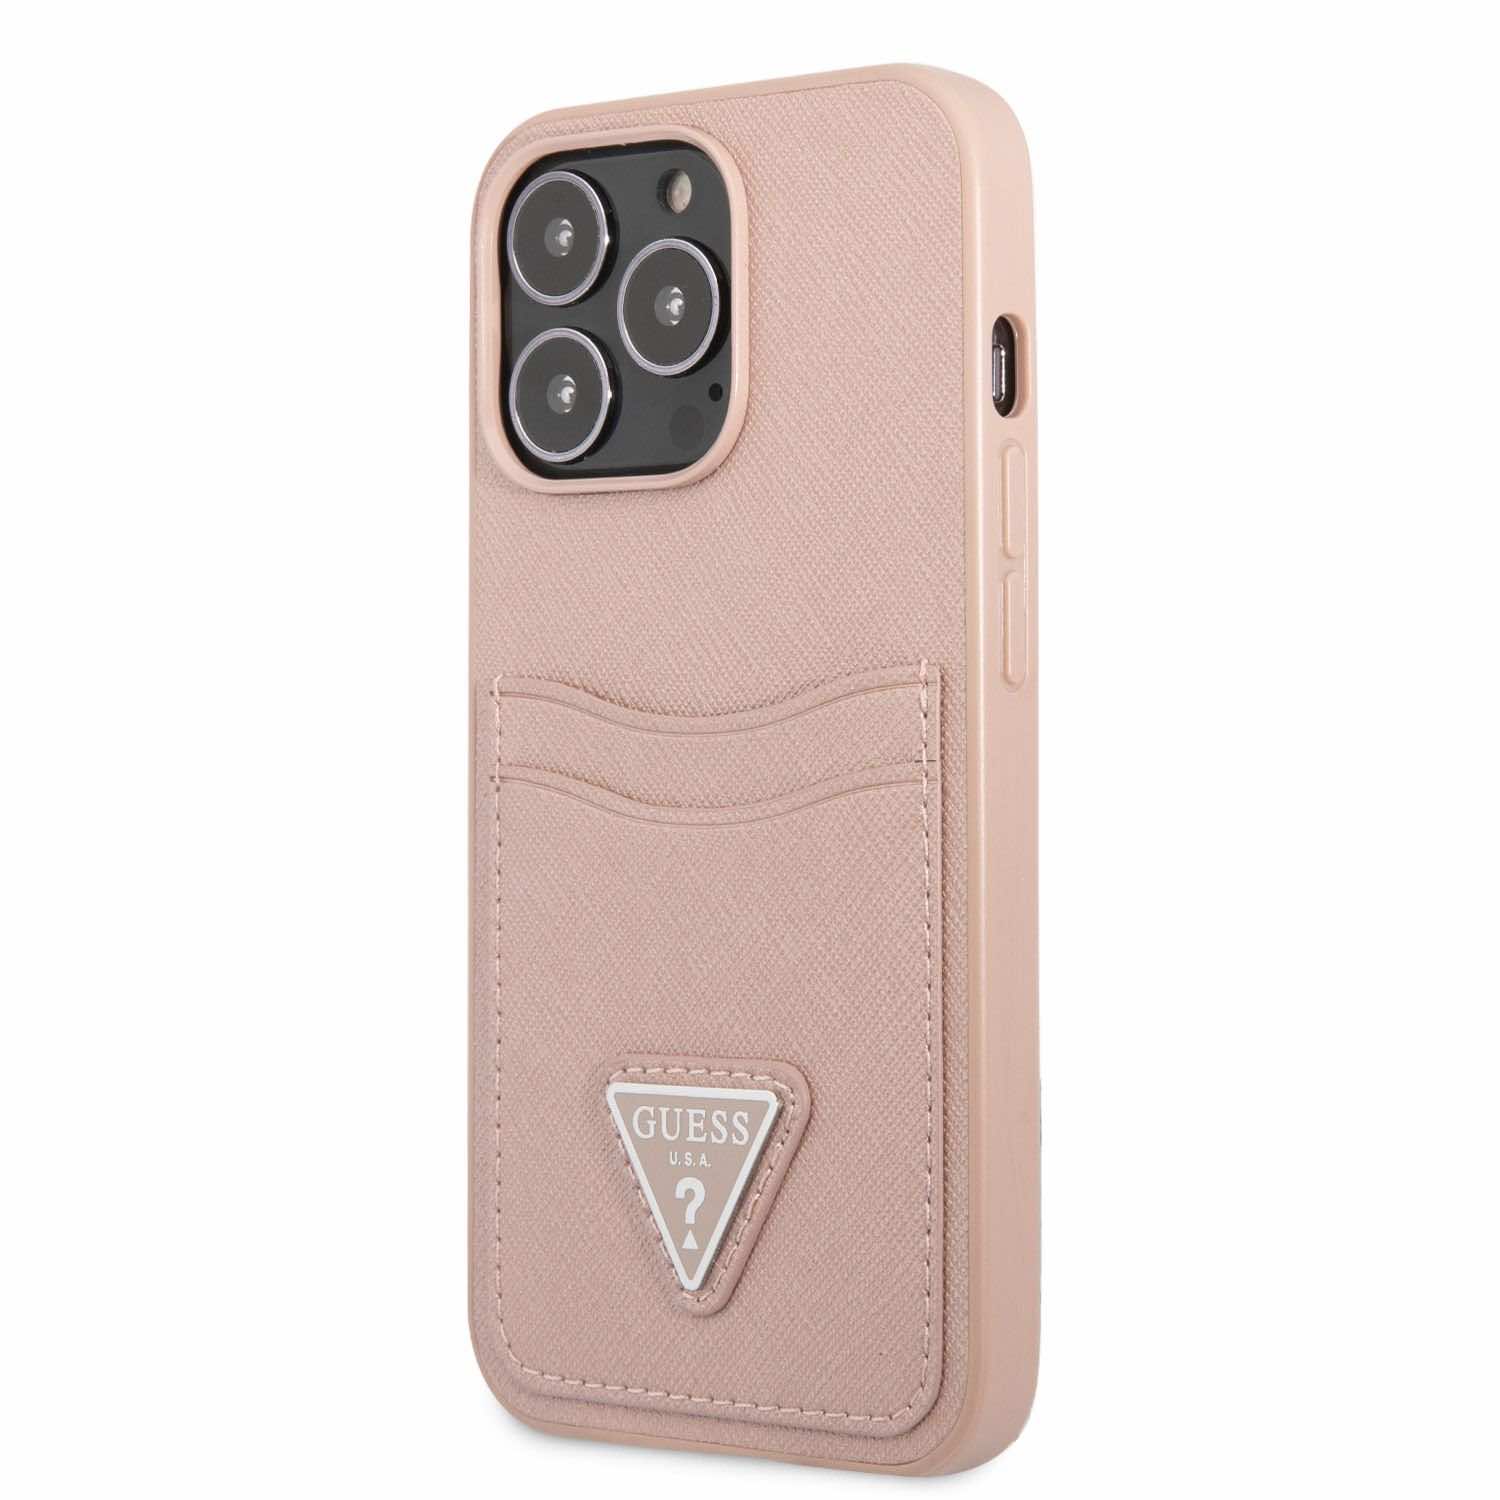 Guess Saffiano Double Card Pu Leather Hard Case For Iphone 13 Pro Max Pink Price Dice Bg